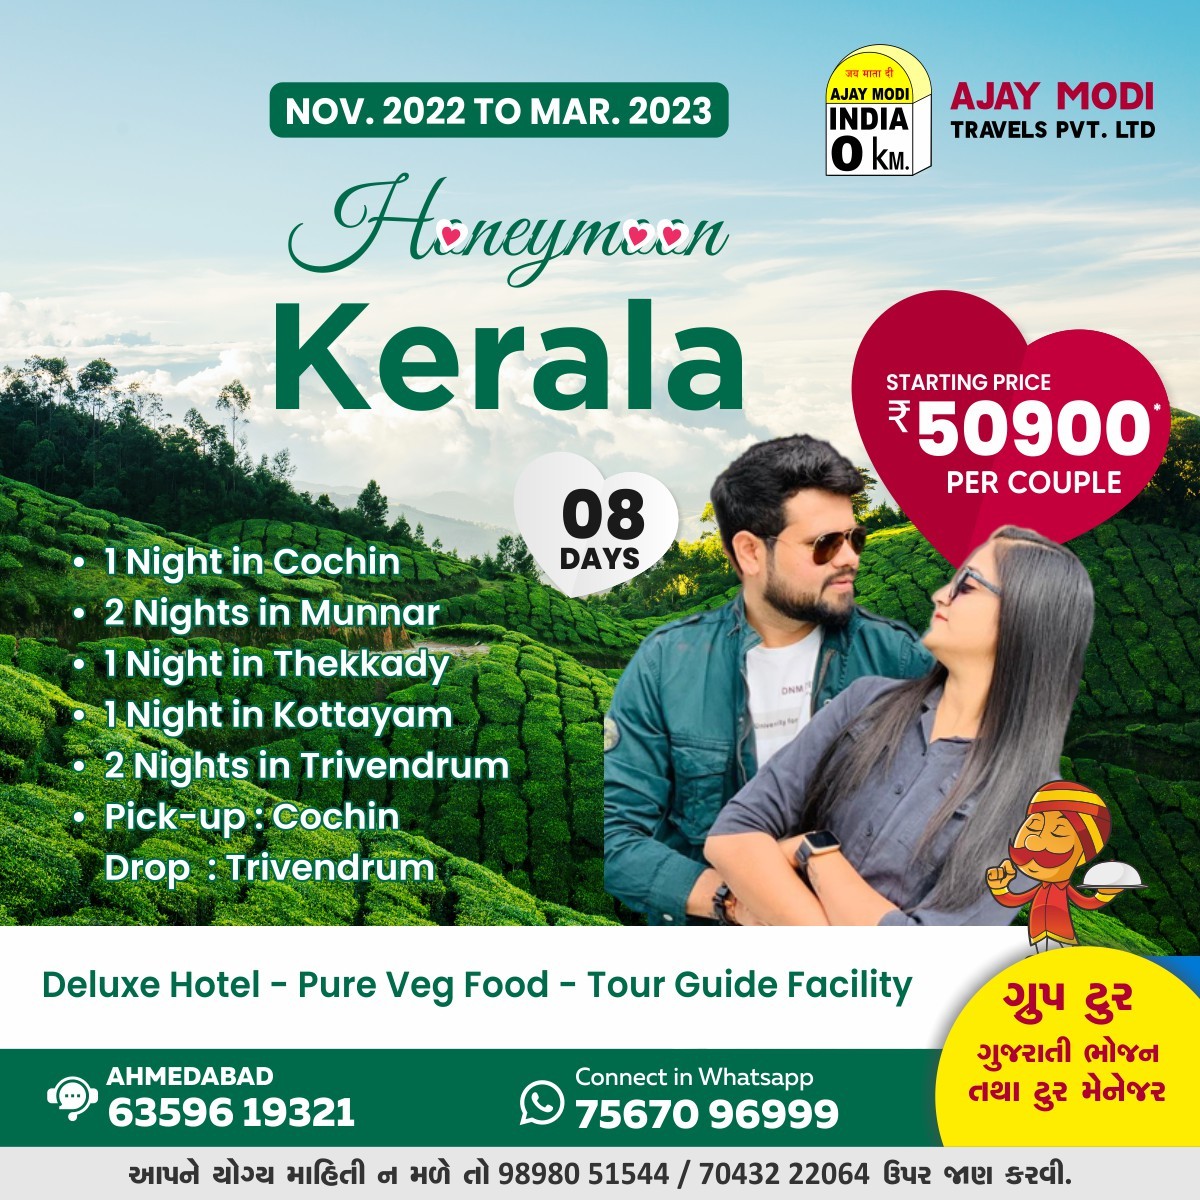 ajay modi south tour packages